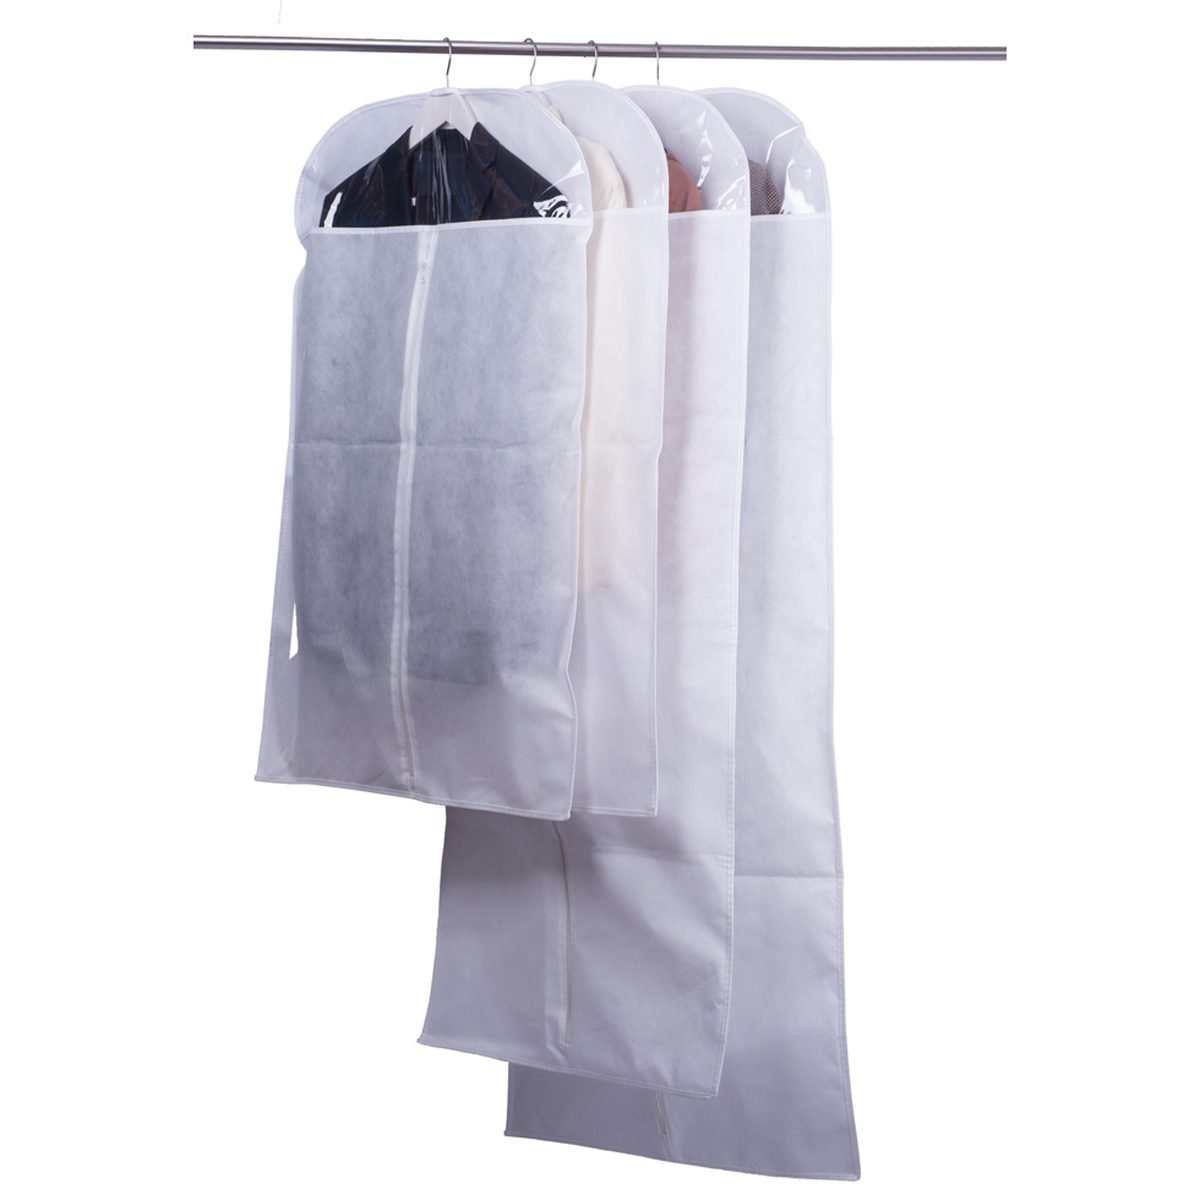 Best Way to Store Clothes: Cloth Garment Bags for Delicate Clothing